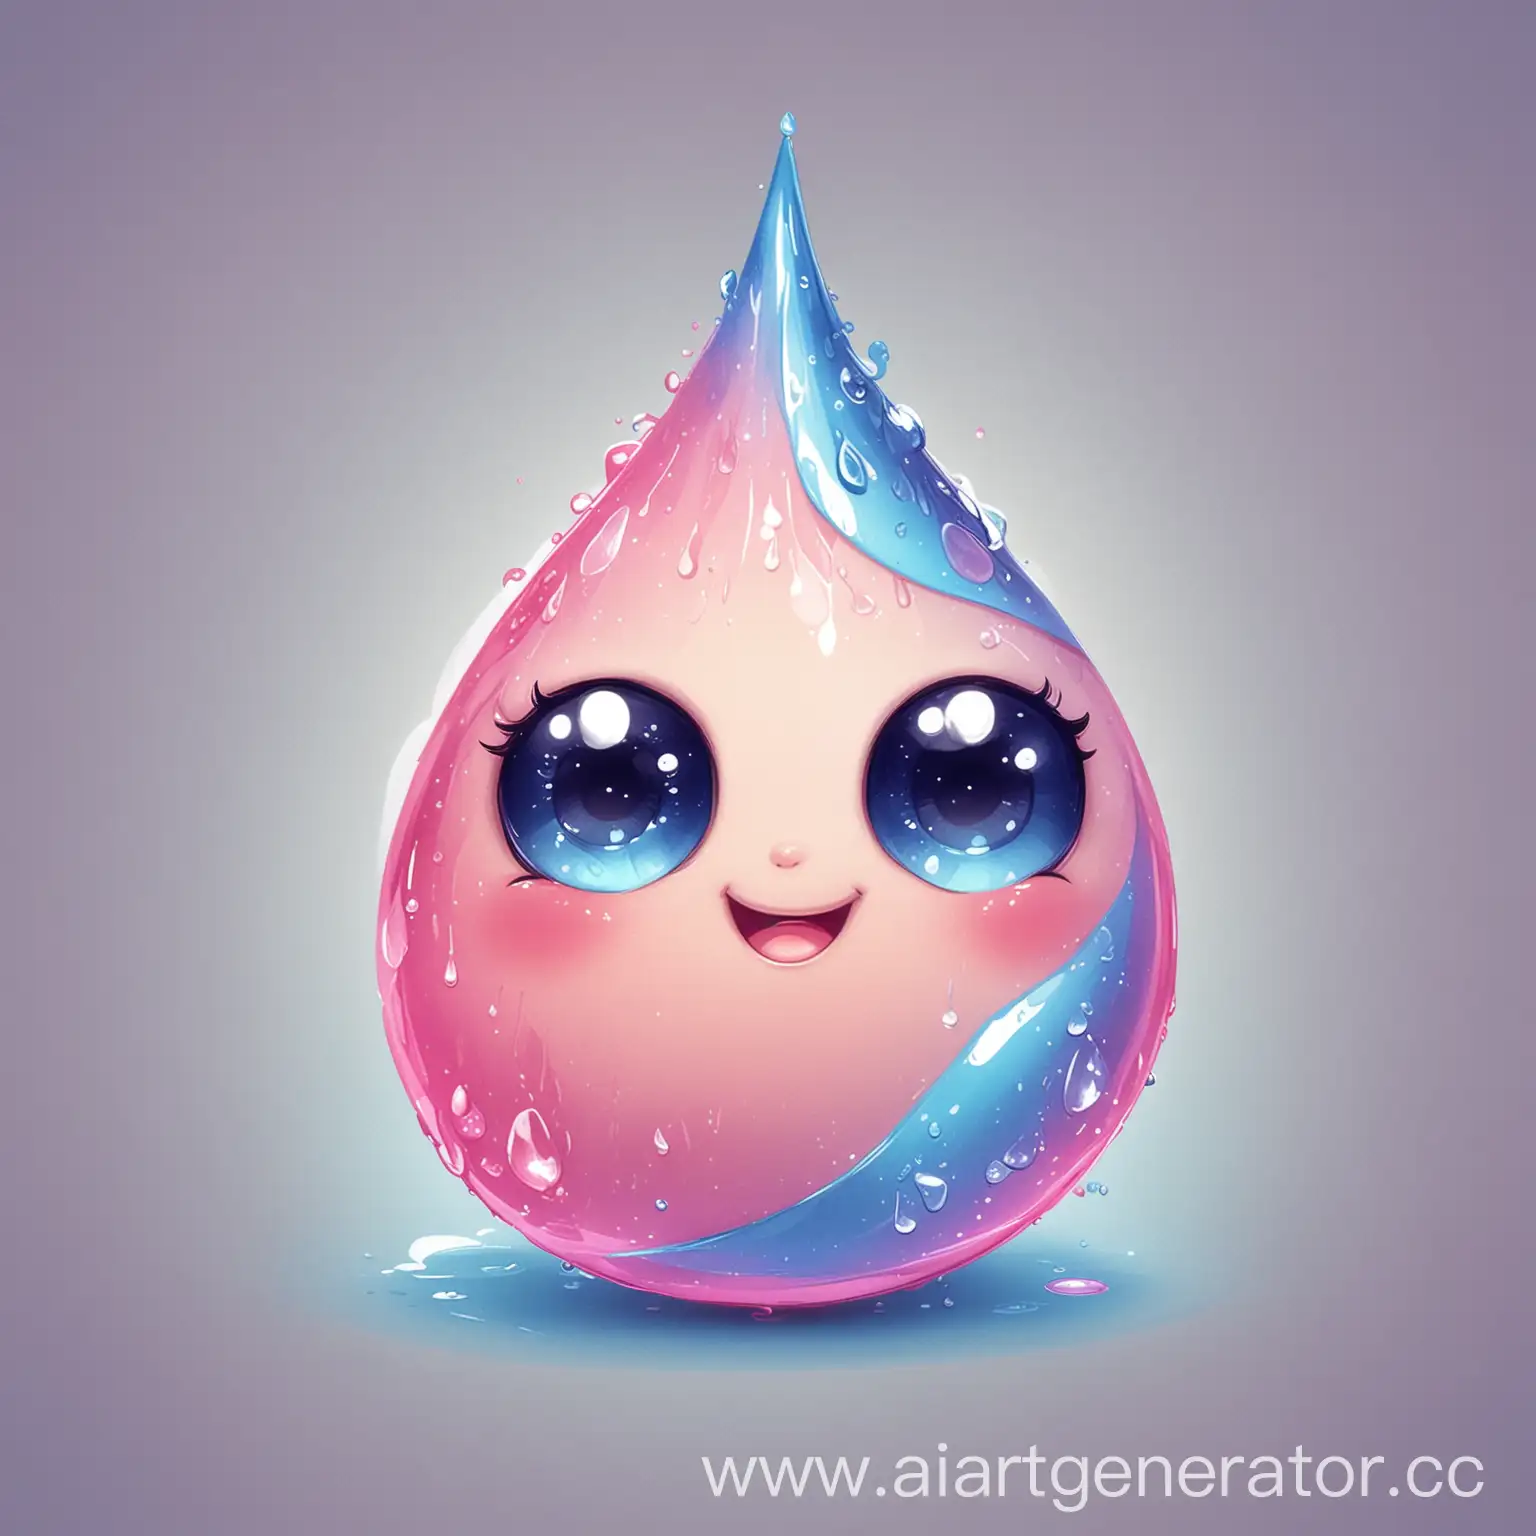 Adorable-DropShaped-Character-in-Blue-and-Pink-Colors